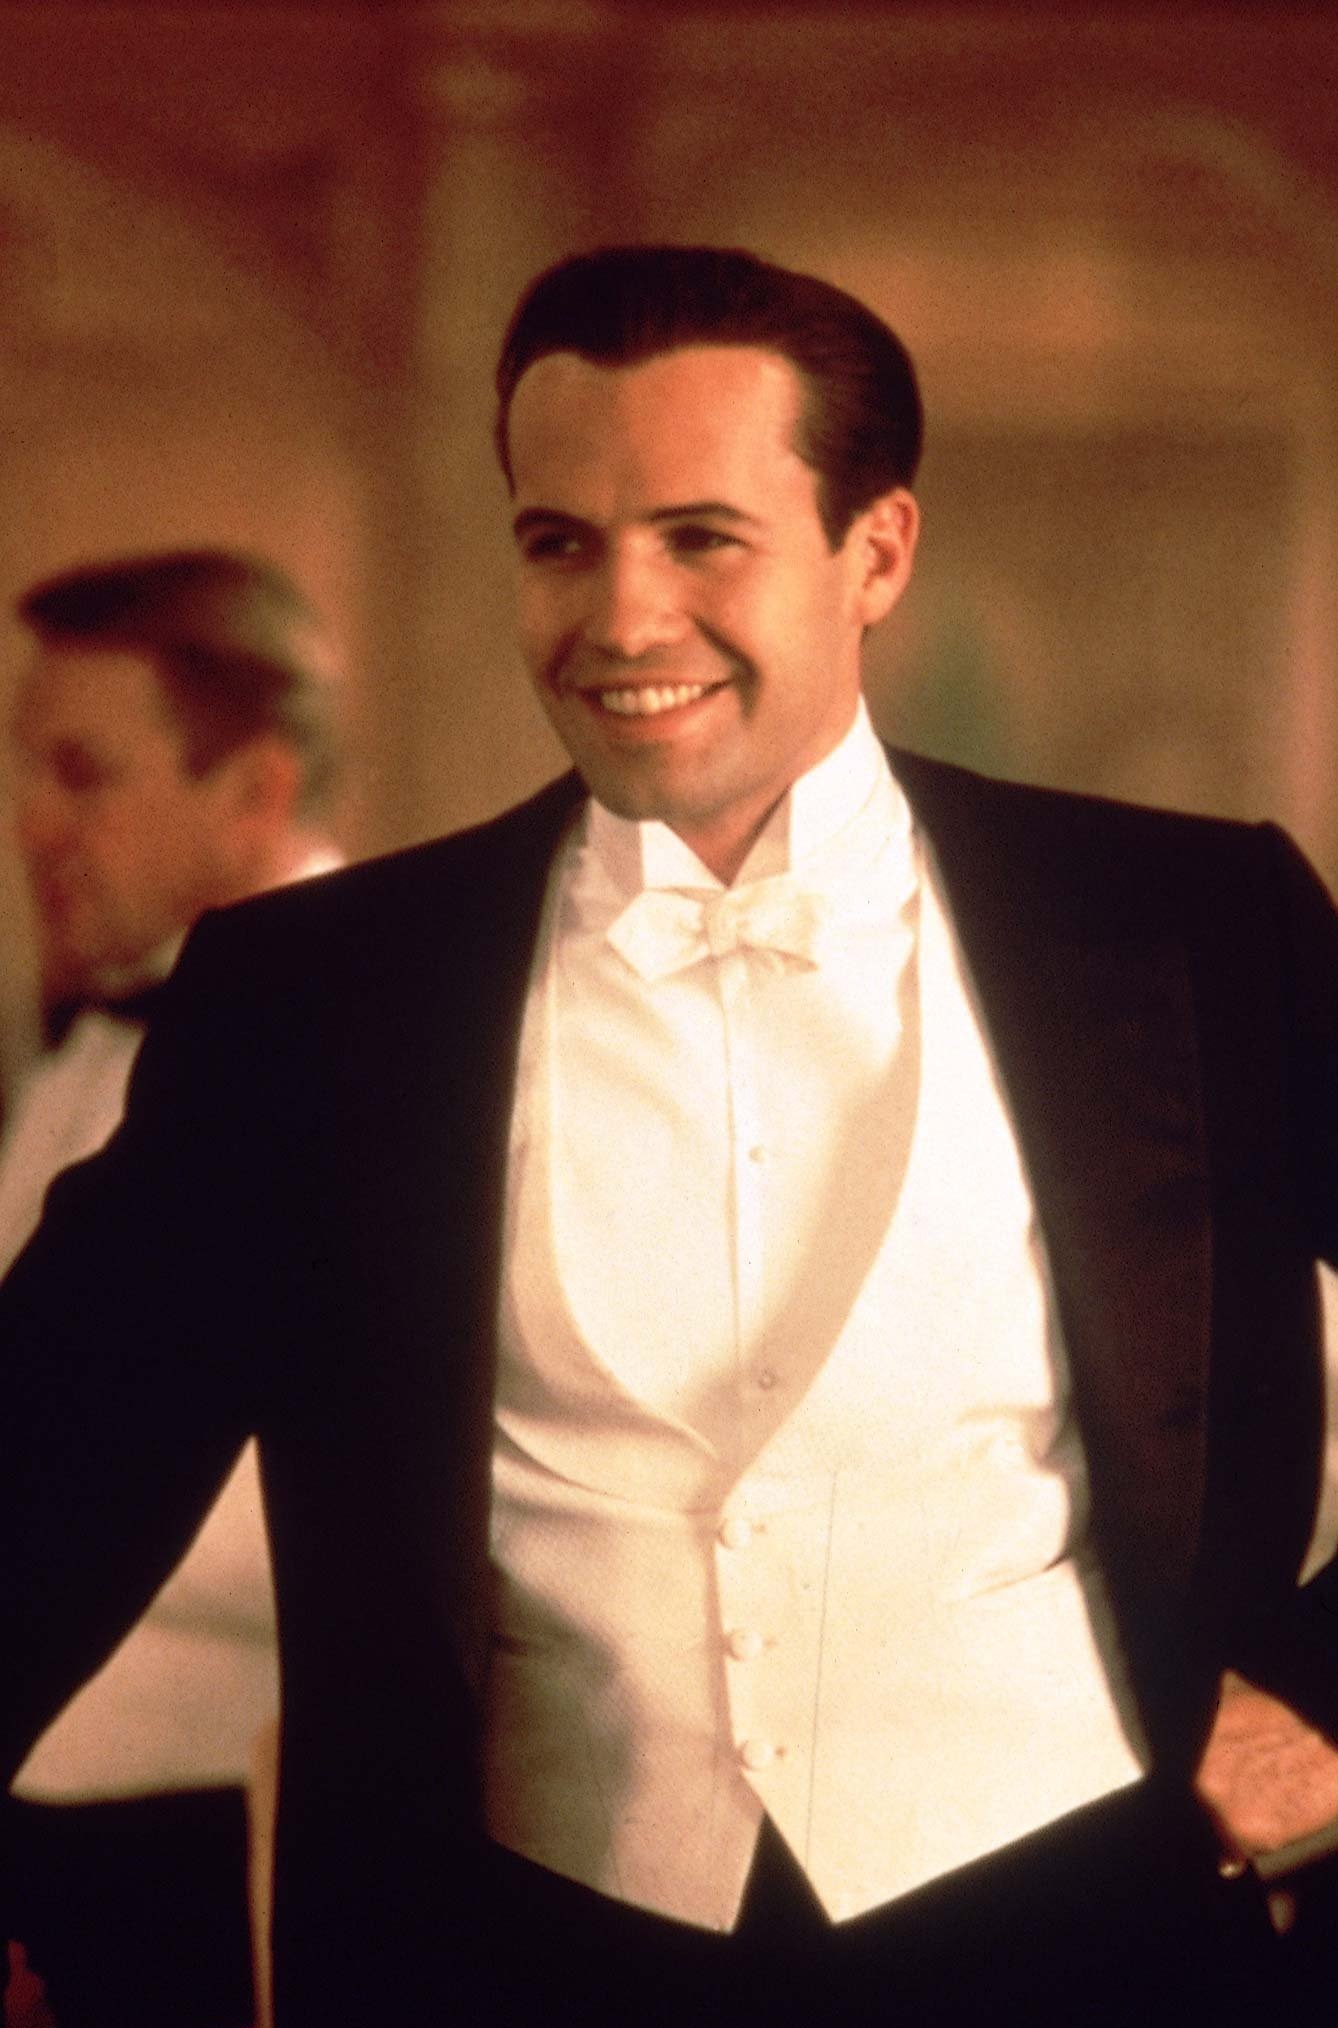 Billy Zane was known for his clean-shaven look and floppy brunette locks